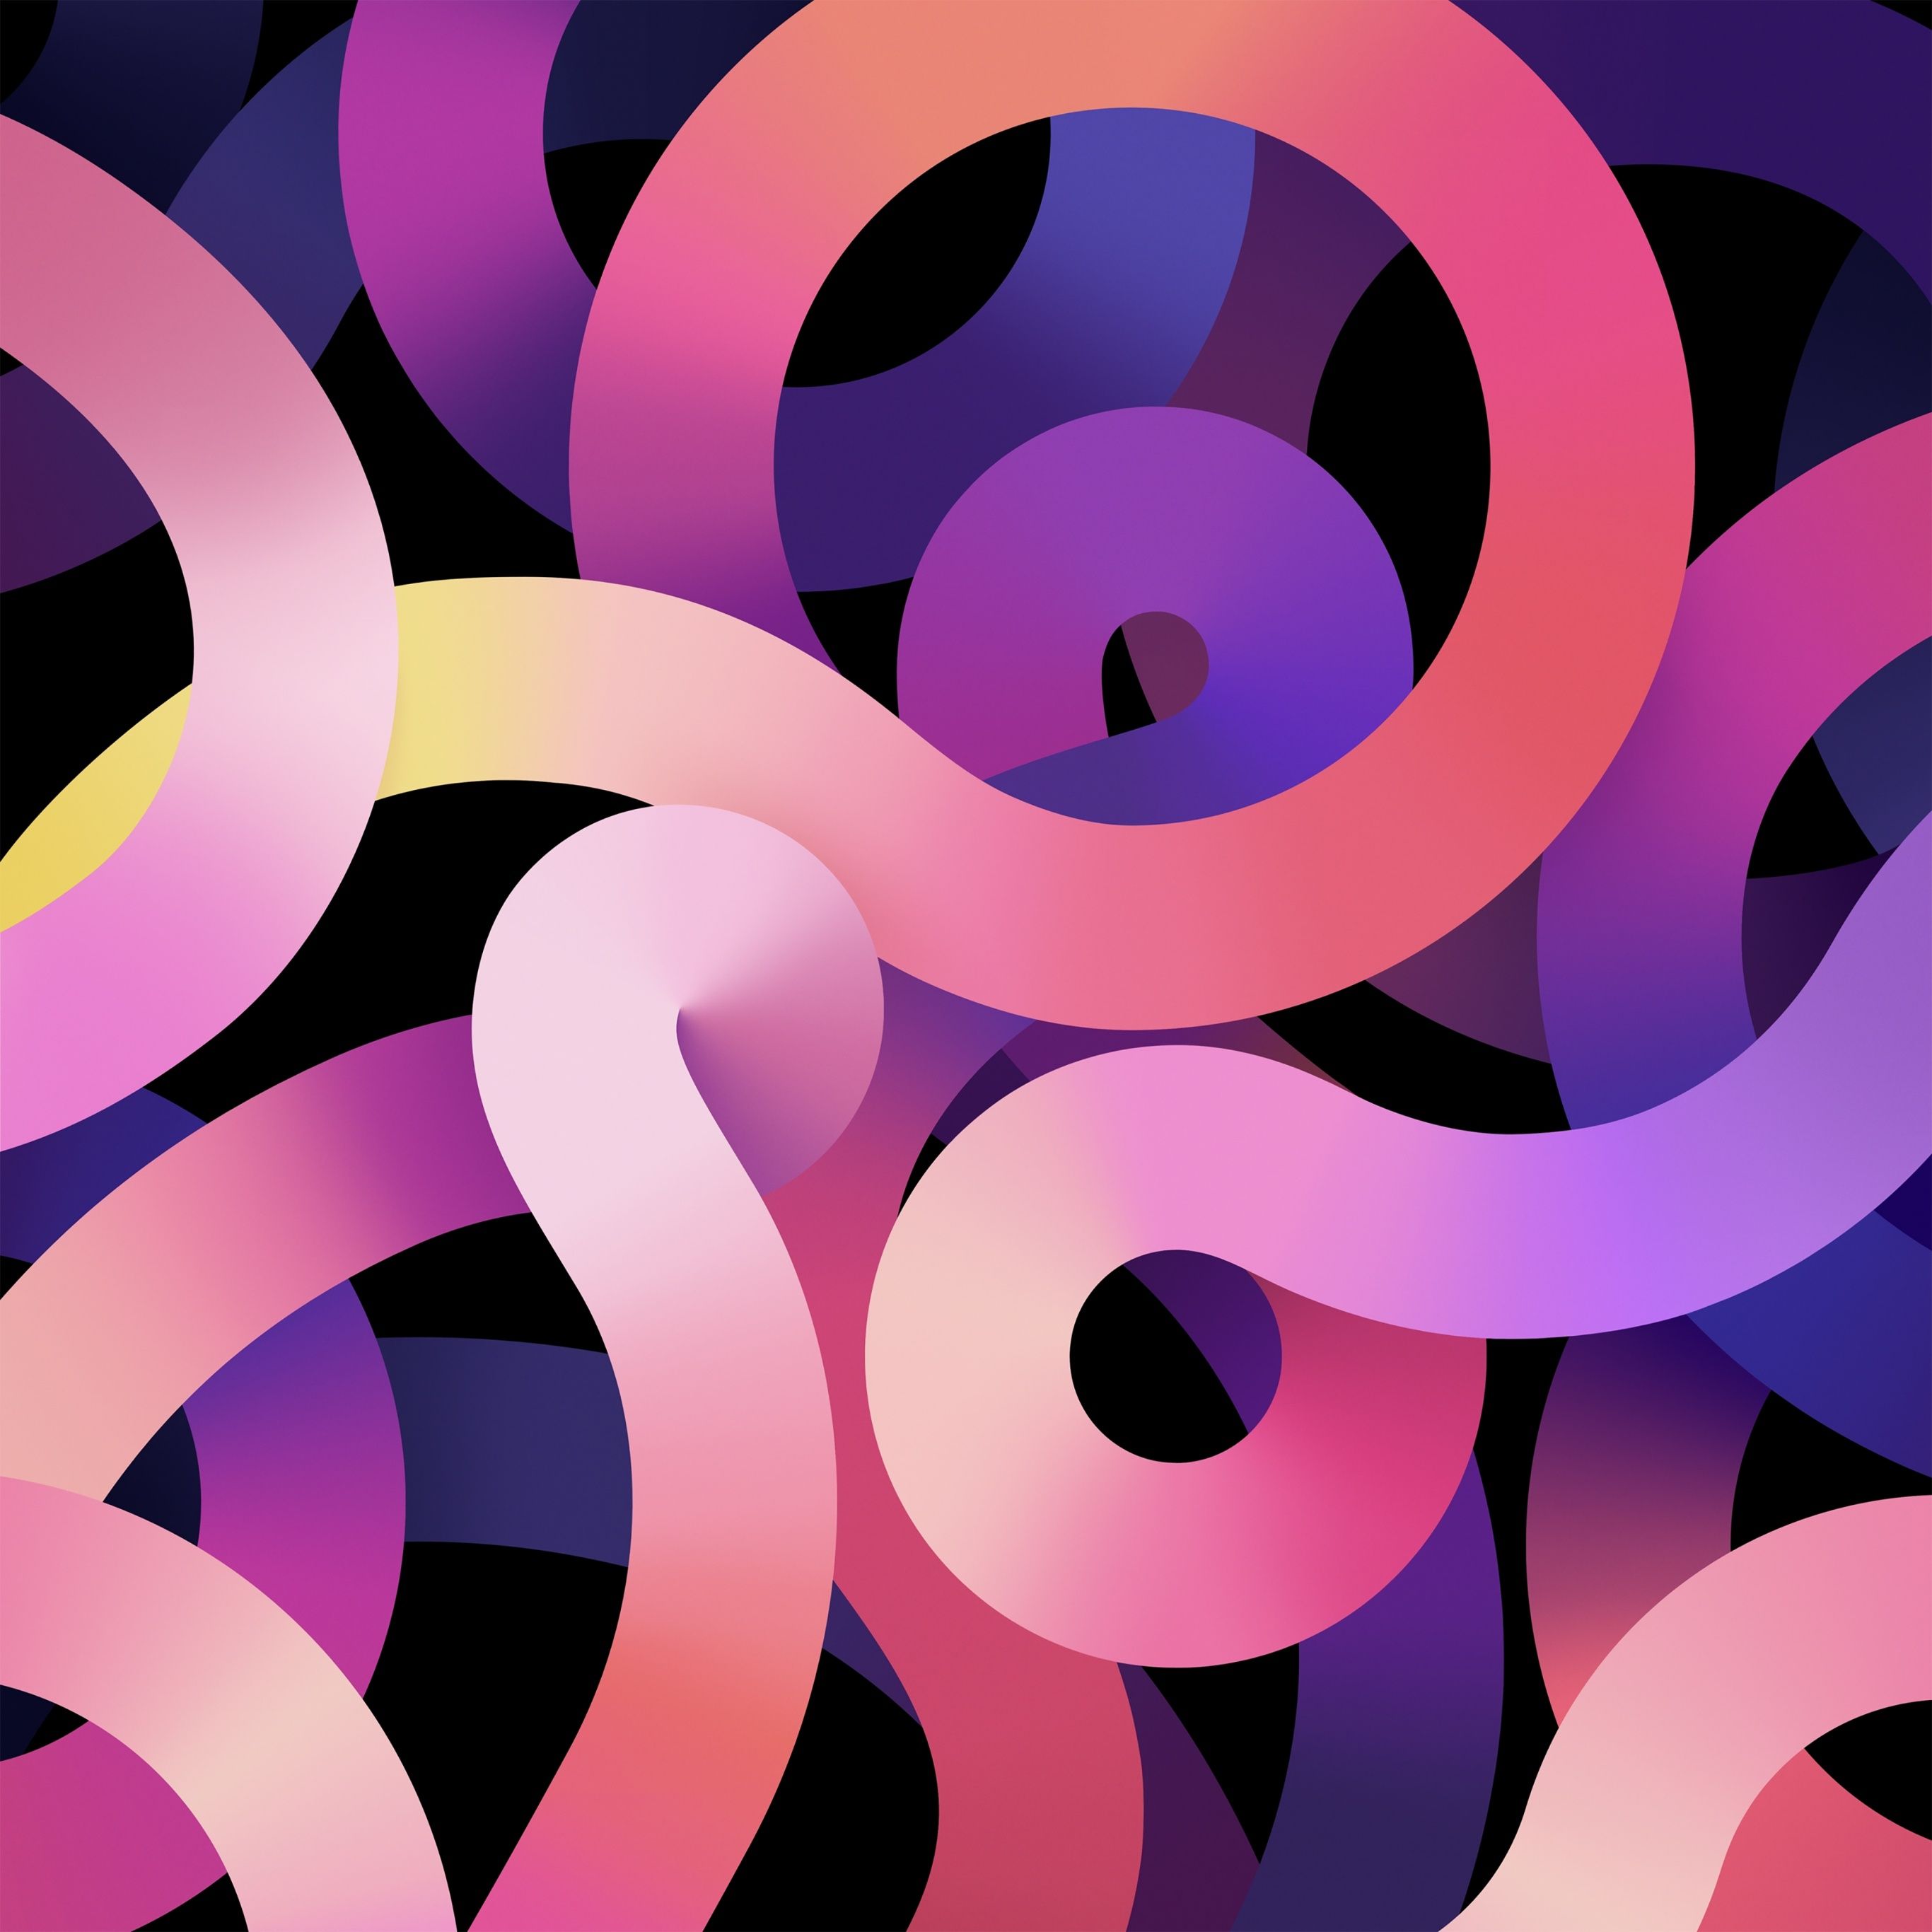 A colorful abstract pattern of spirals on black - IPad, hot pink